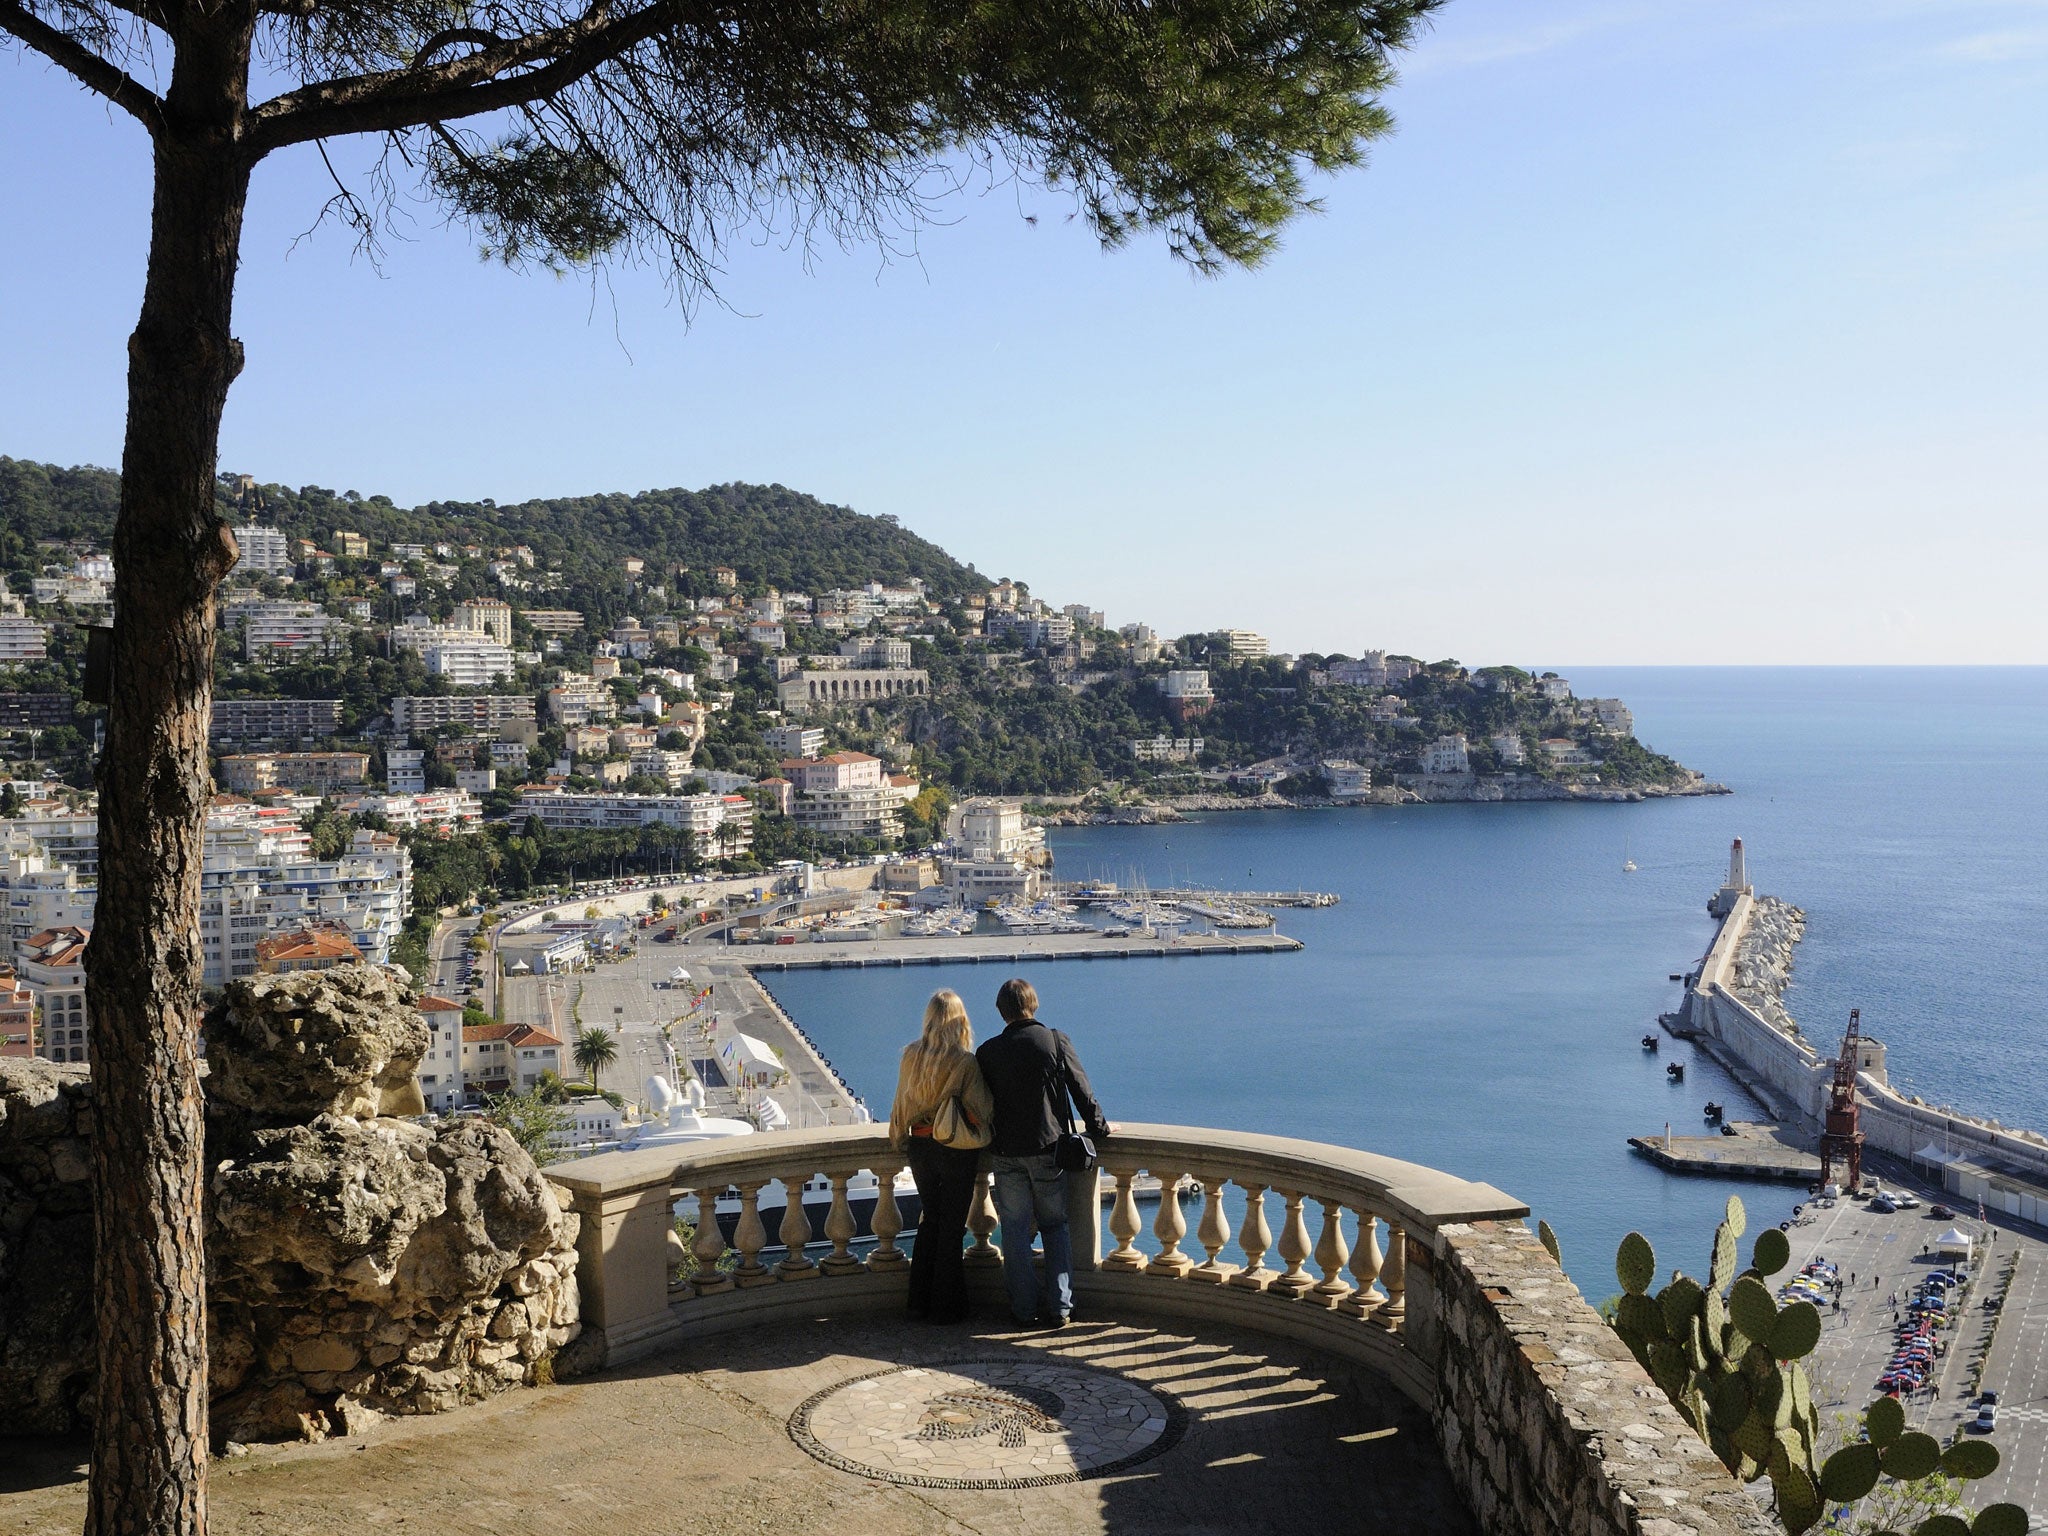 Bay watch: The view of Nice’s harbour from the Colline du Château